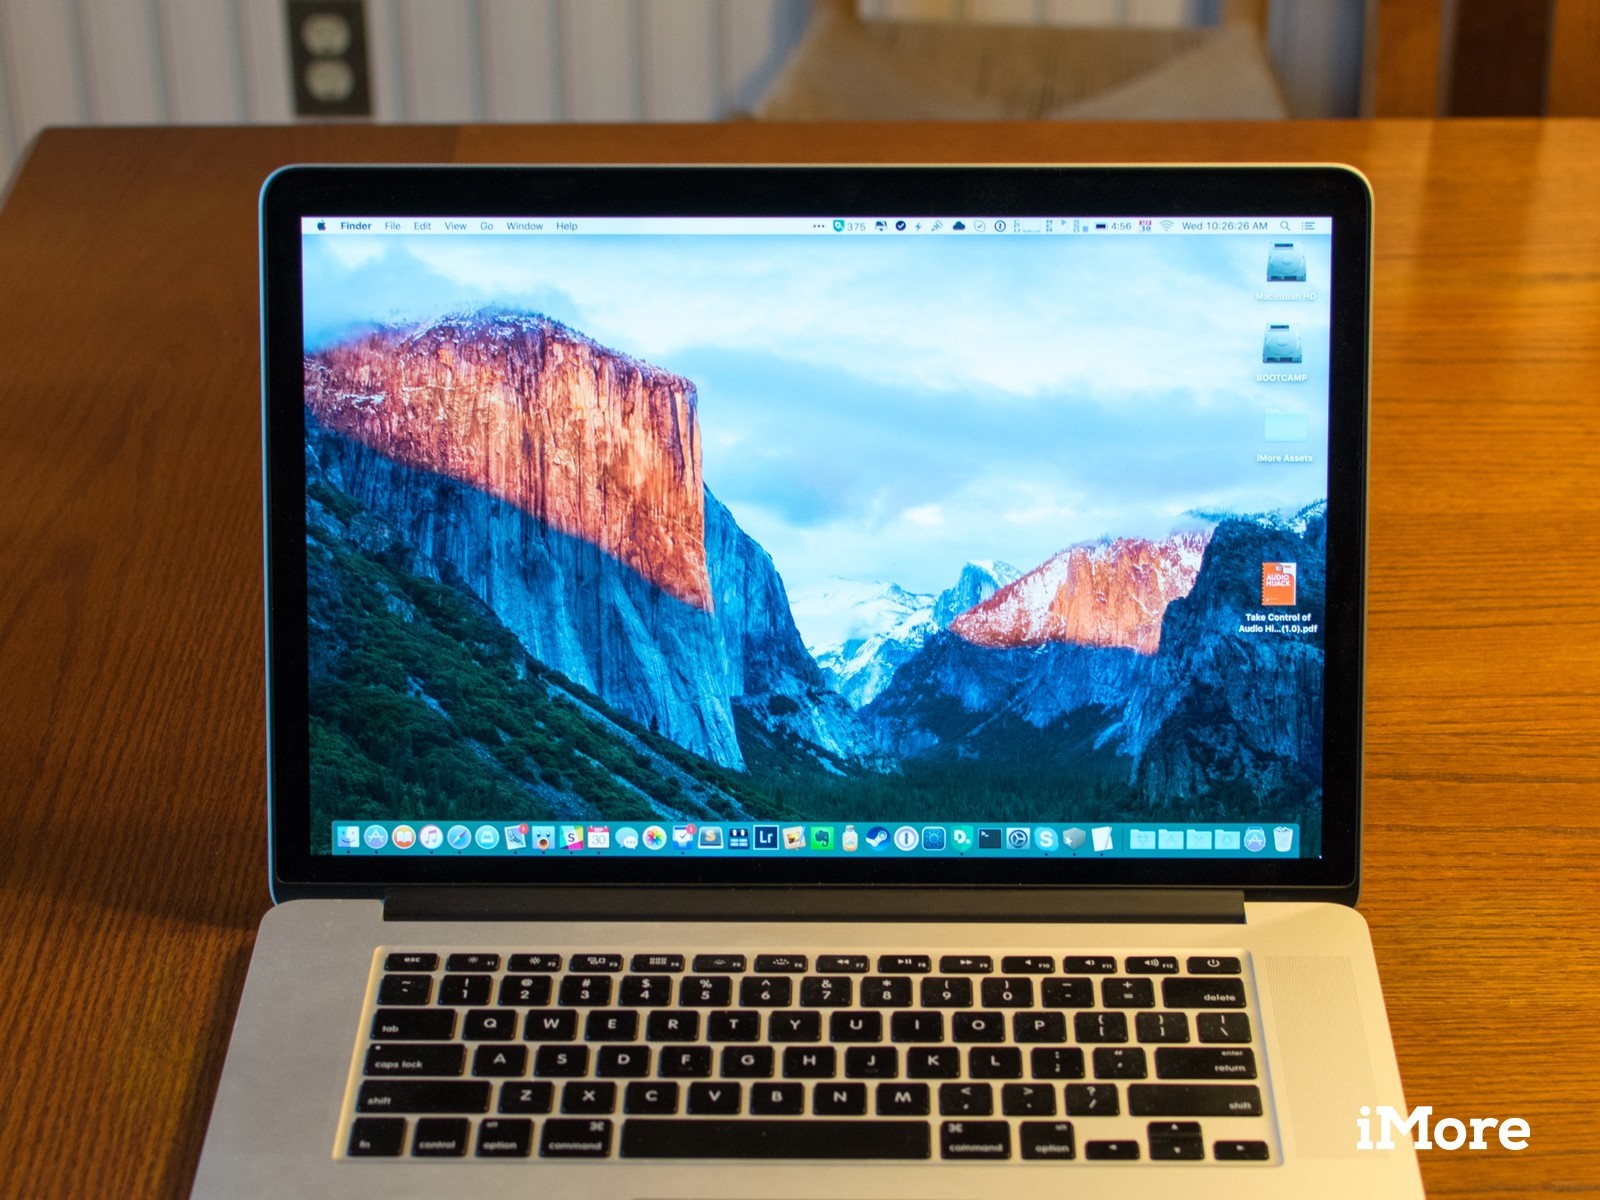 how to right click on mac trackpad 10.11.6